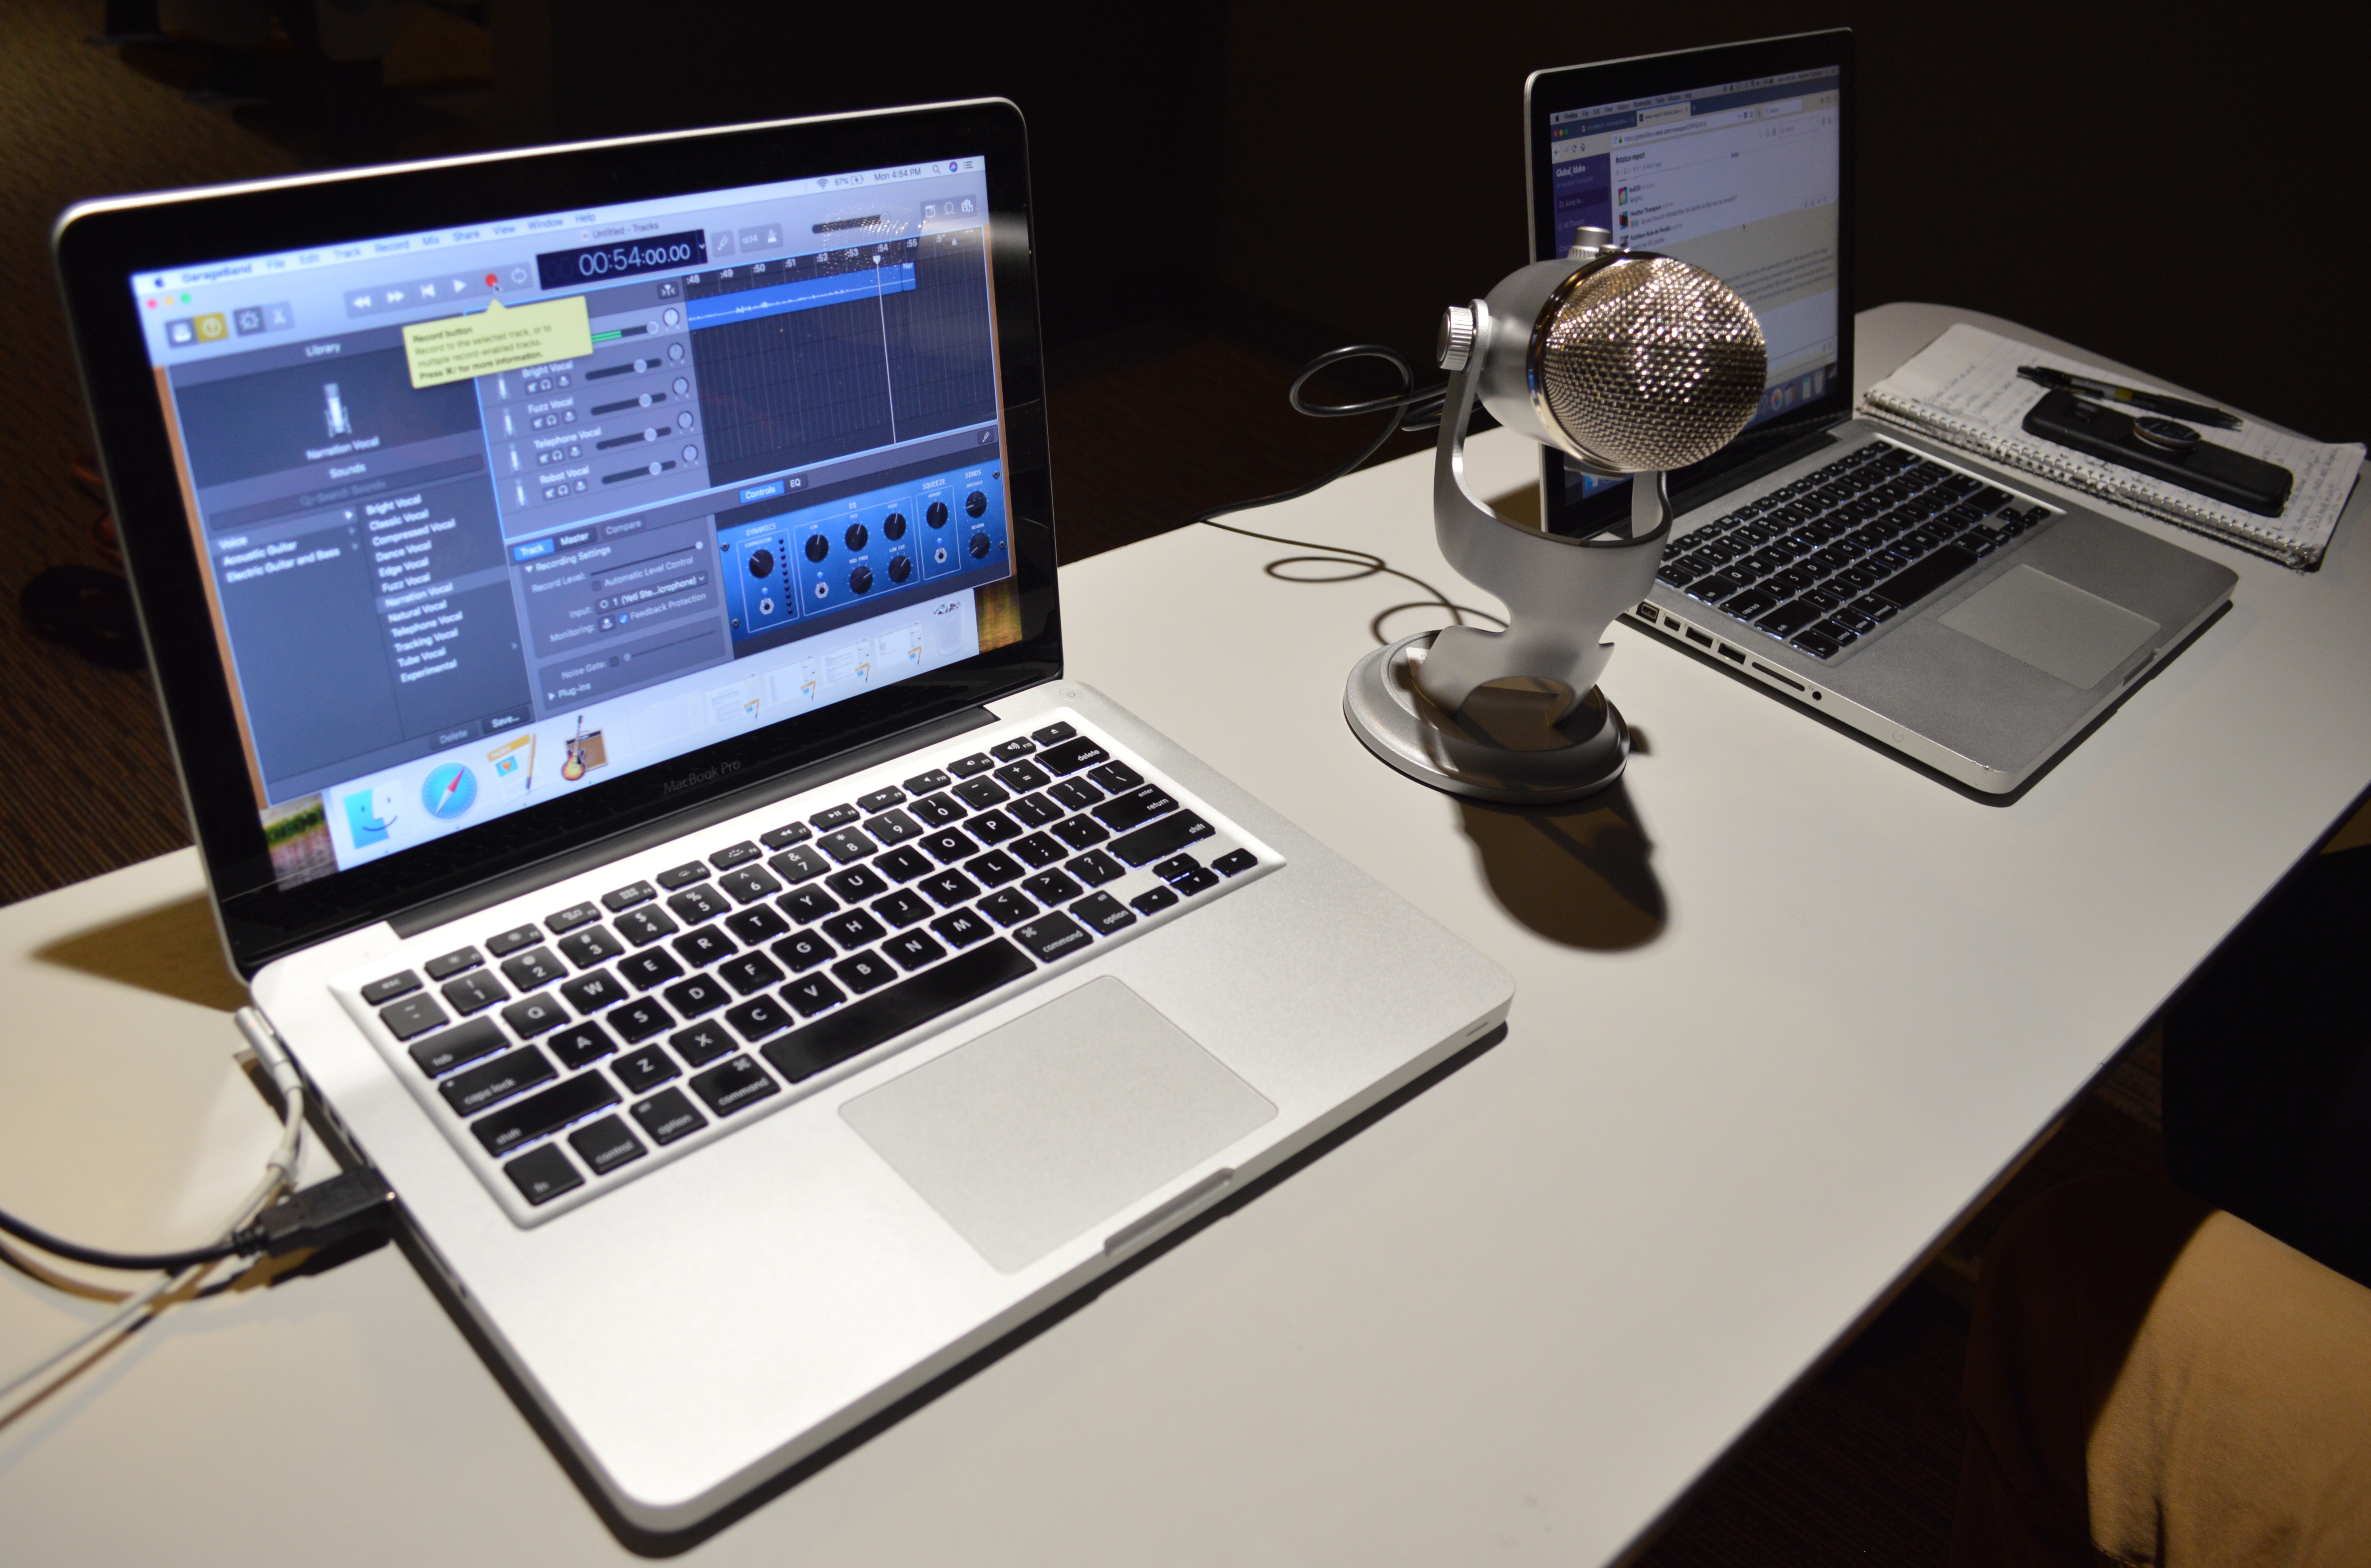 podcast recording equipment, including microphone and laptops